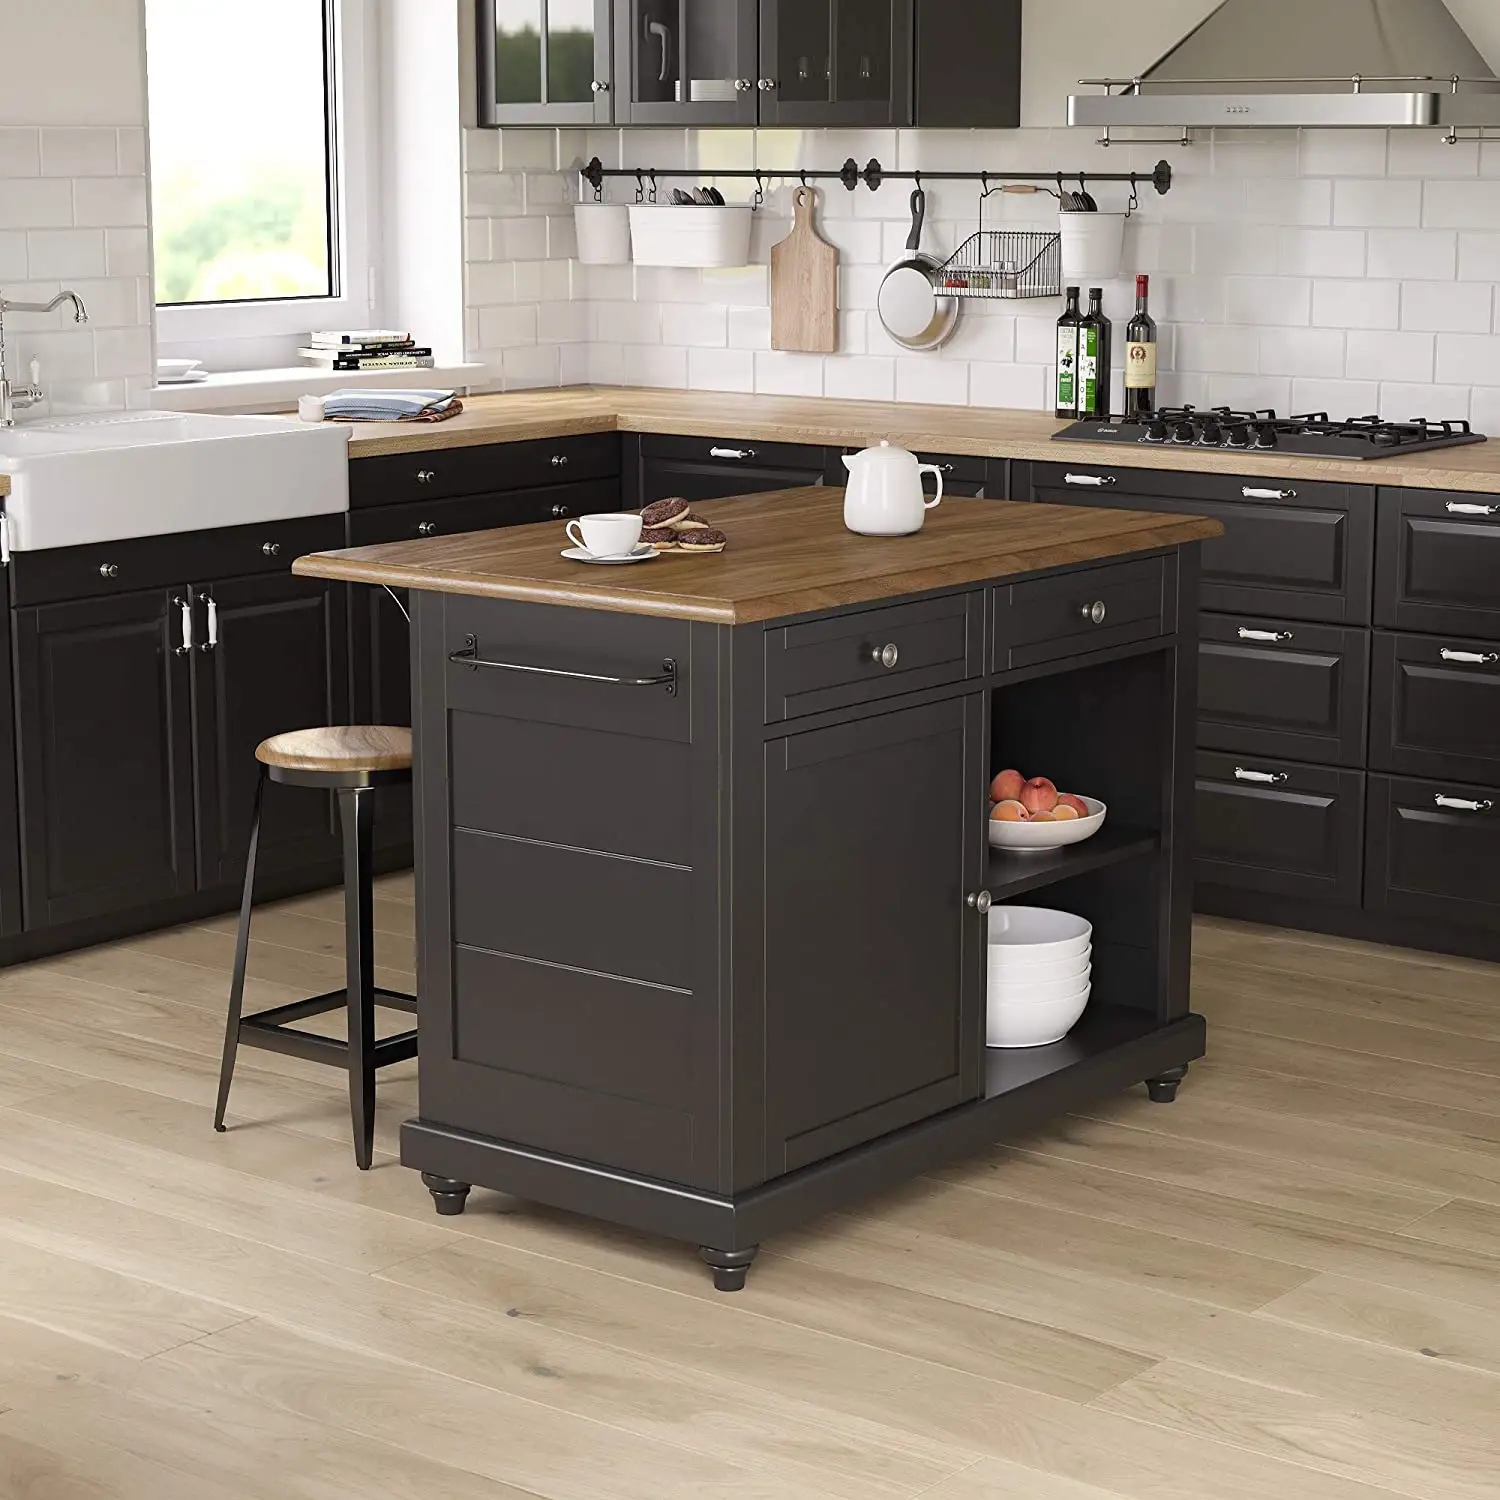 march expo 2021 American solid wood kitchen cabinets modern kitchen island with wheels kitchen unite furniture